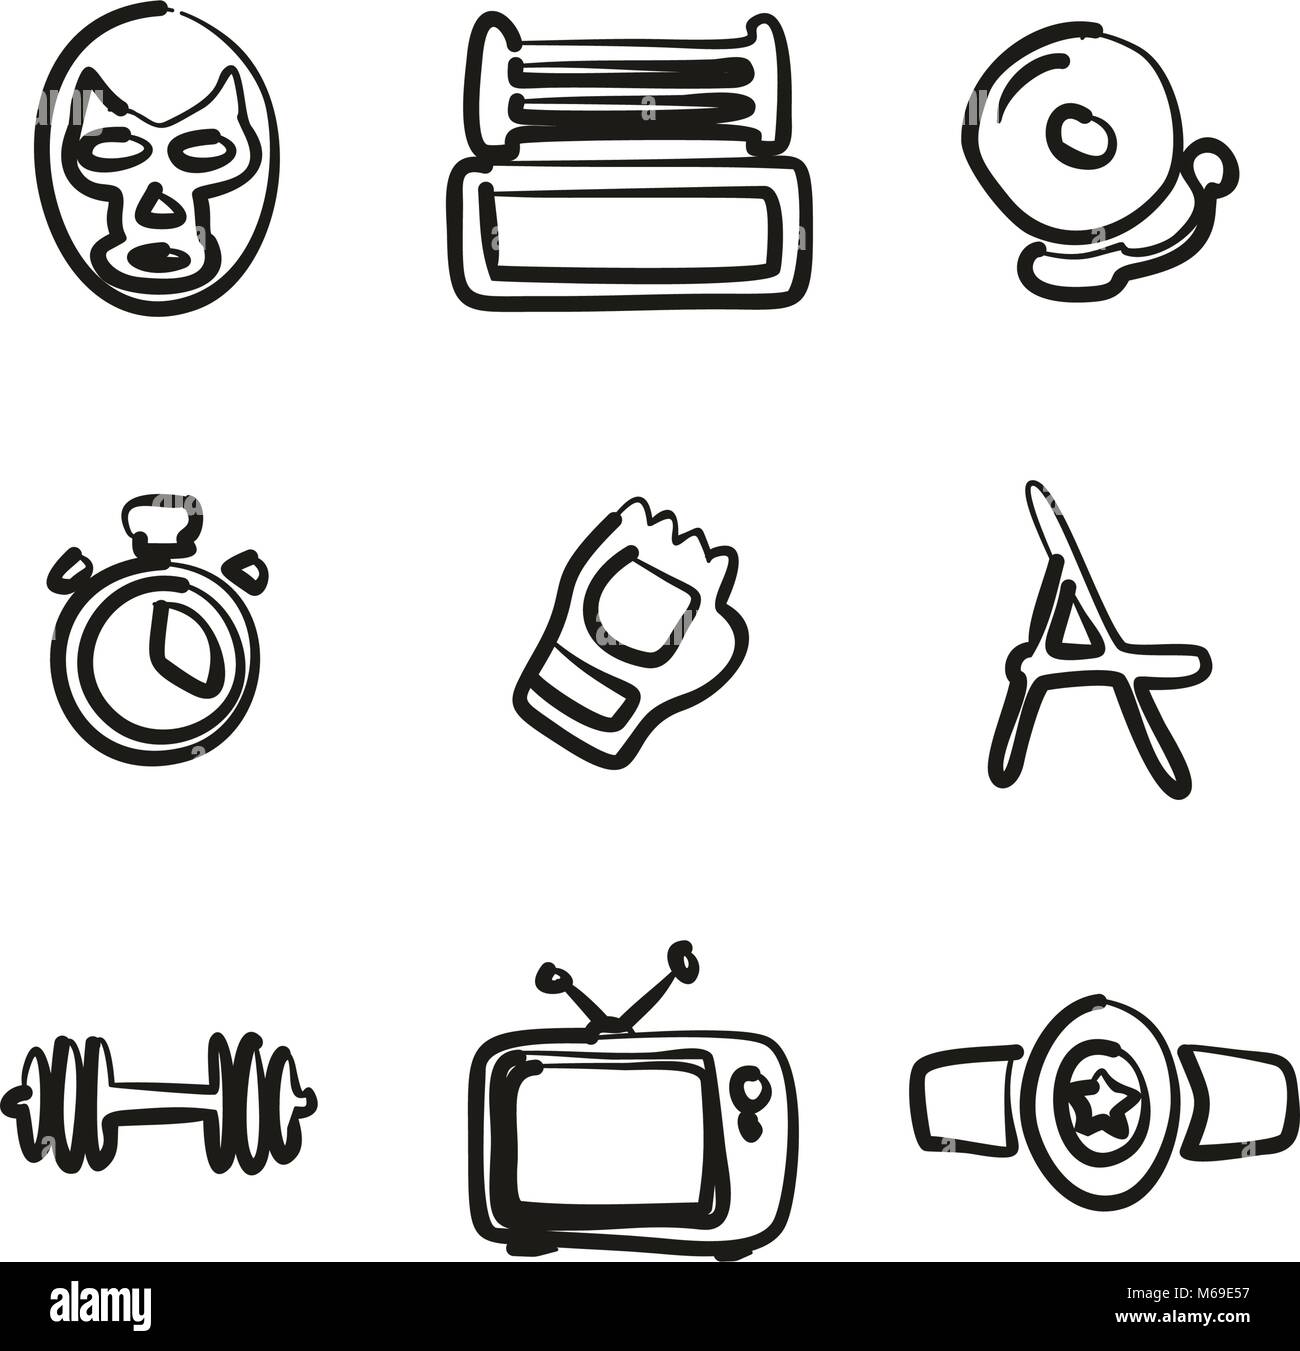 Wrestling Icons Freehand Stock Vector